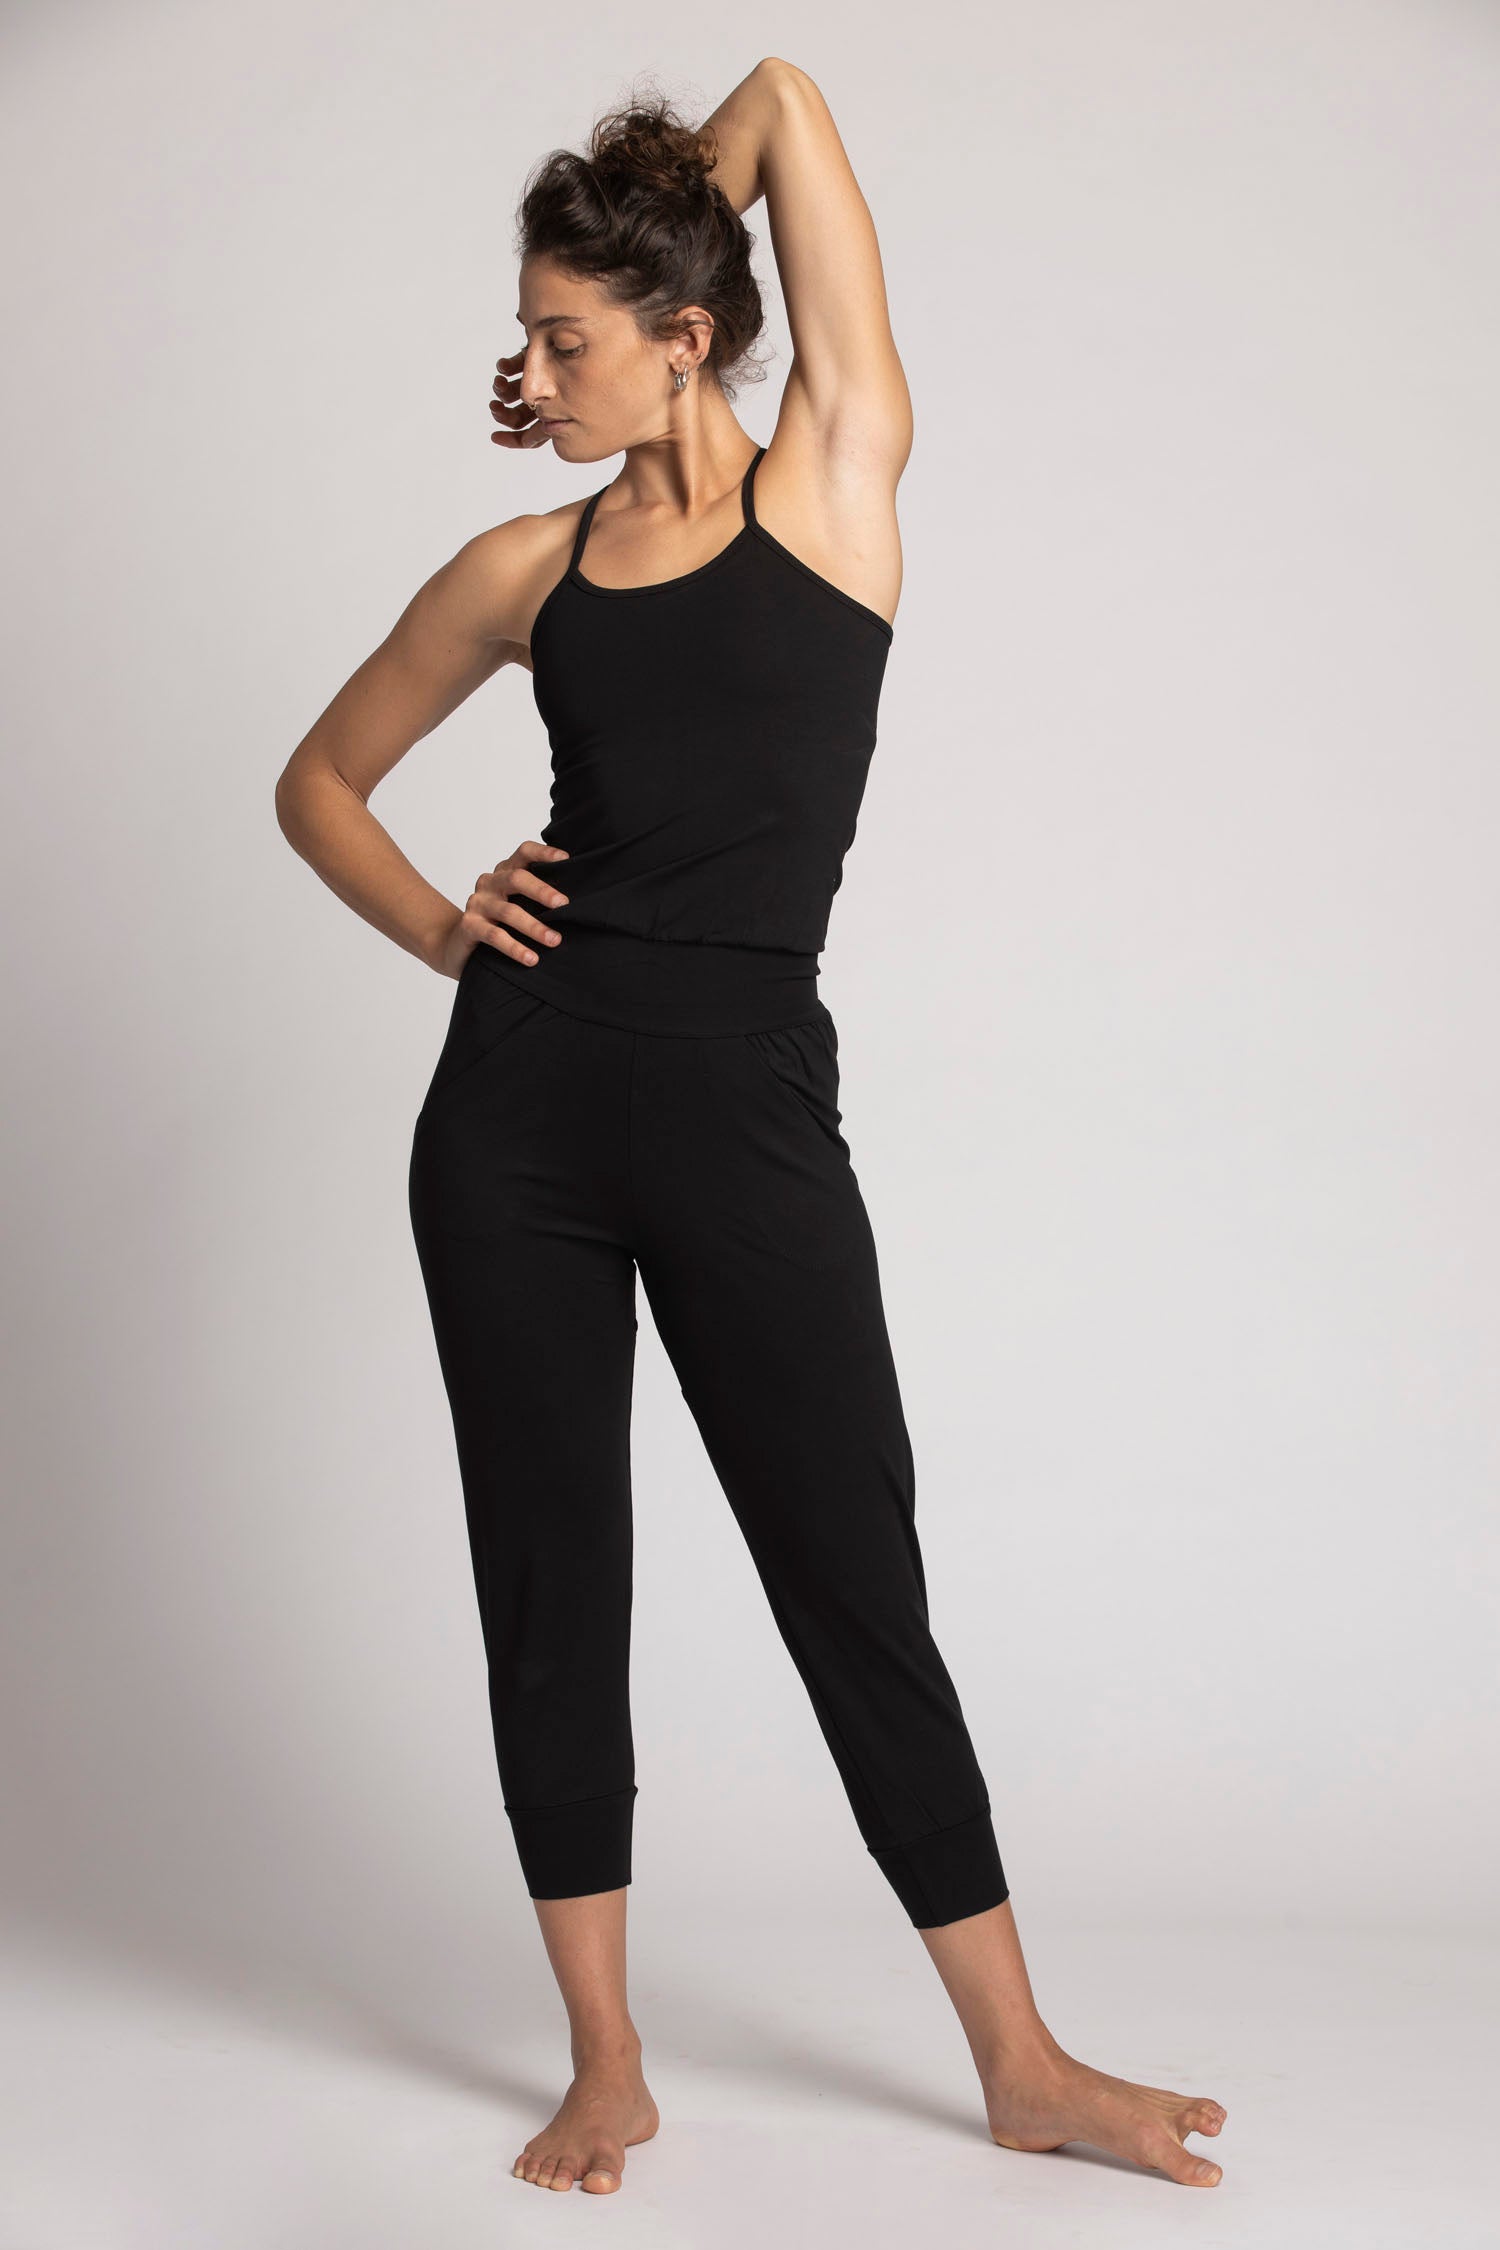 Womens Yoga Jumpsuit Set For Belly Tightening, Fitness, And Yoga